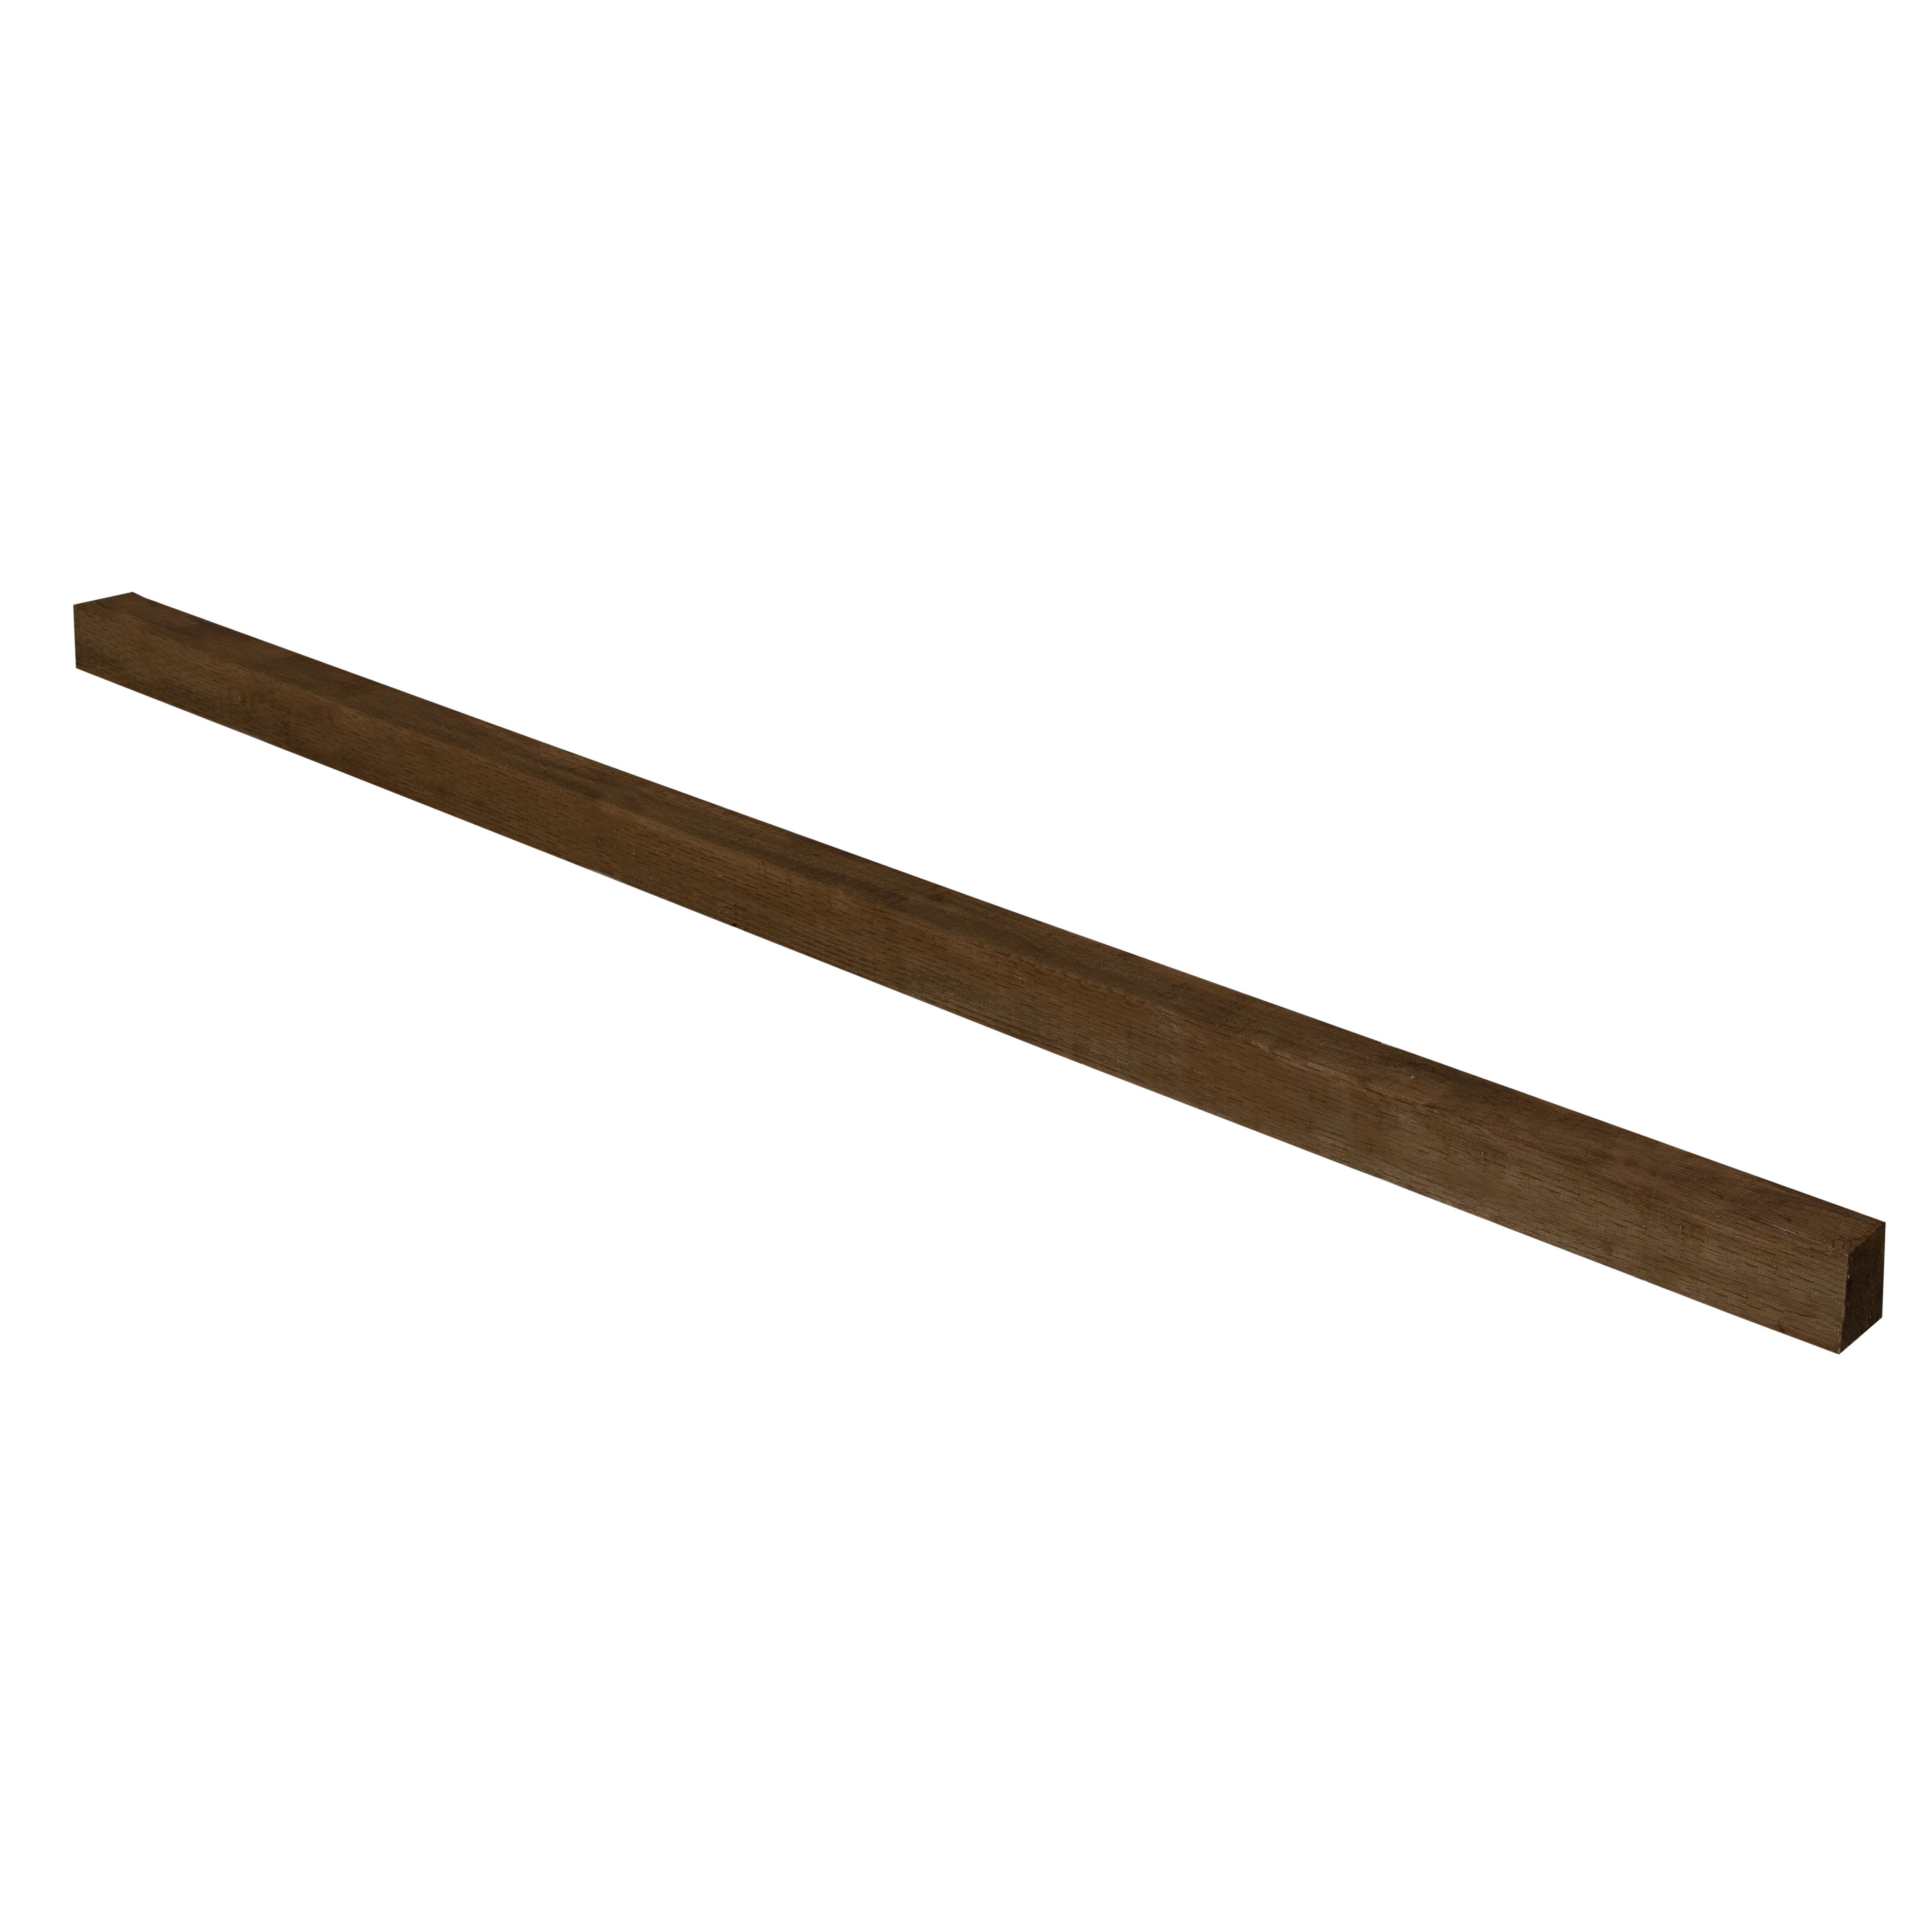 UC4 Brown Square Wooden Fence post (H)2.4m (W)75mm, Pack of 5